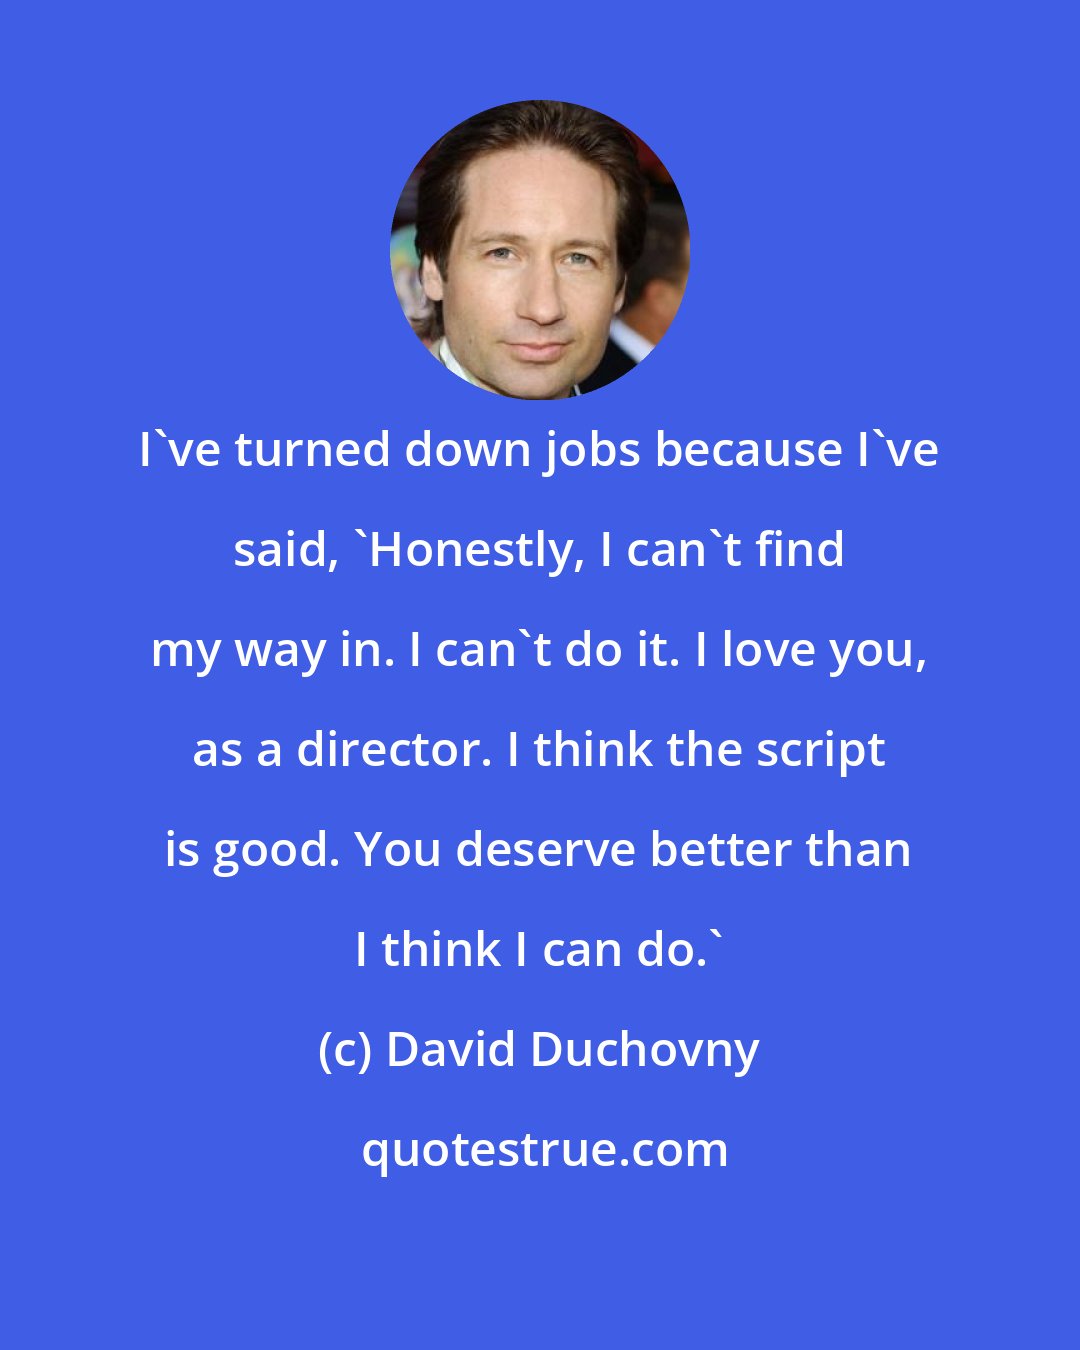 David Duchovny: I've turned down jobs because I've said, 'Honestly, I can't find my way in. I can't do it. I love you, as a director. I think the script is good. You deserve better than I think I can do.'